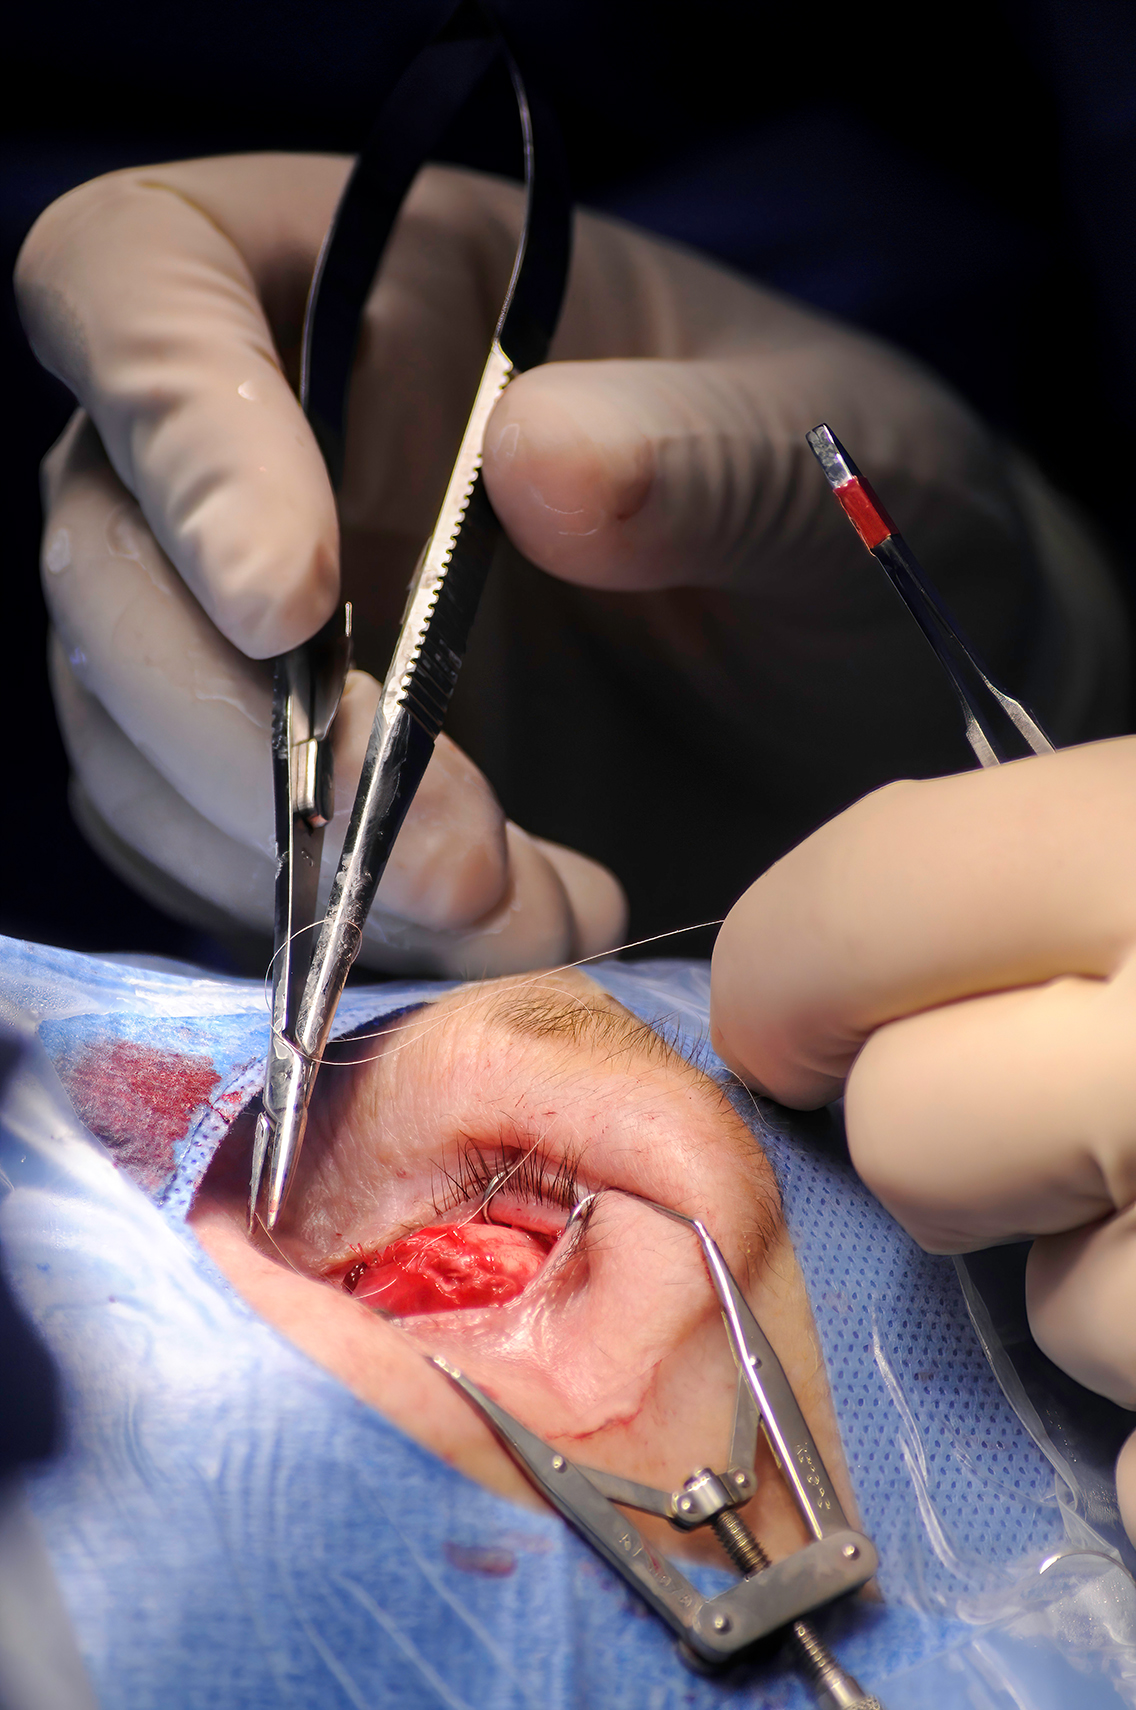 Begining to place sutures during an enucleation surgical procedure performed by oculoplastic surgeon.